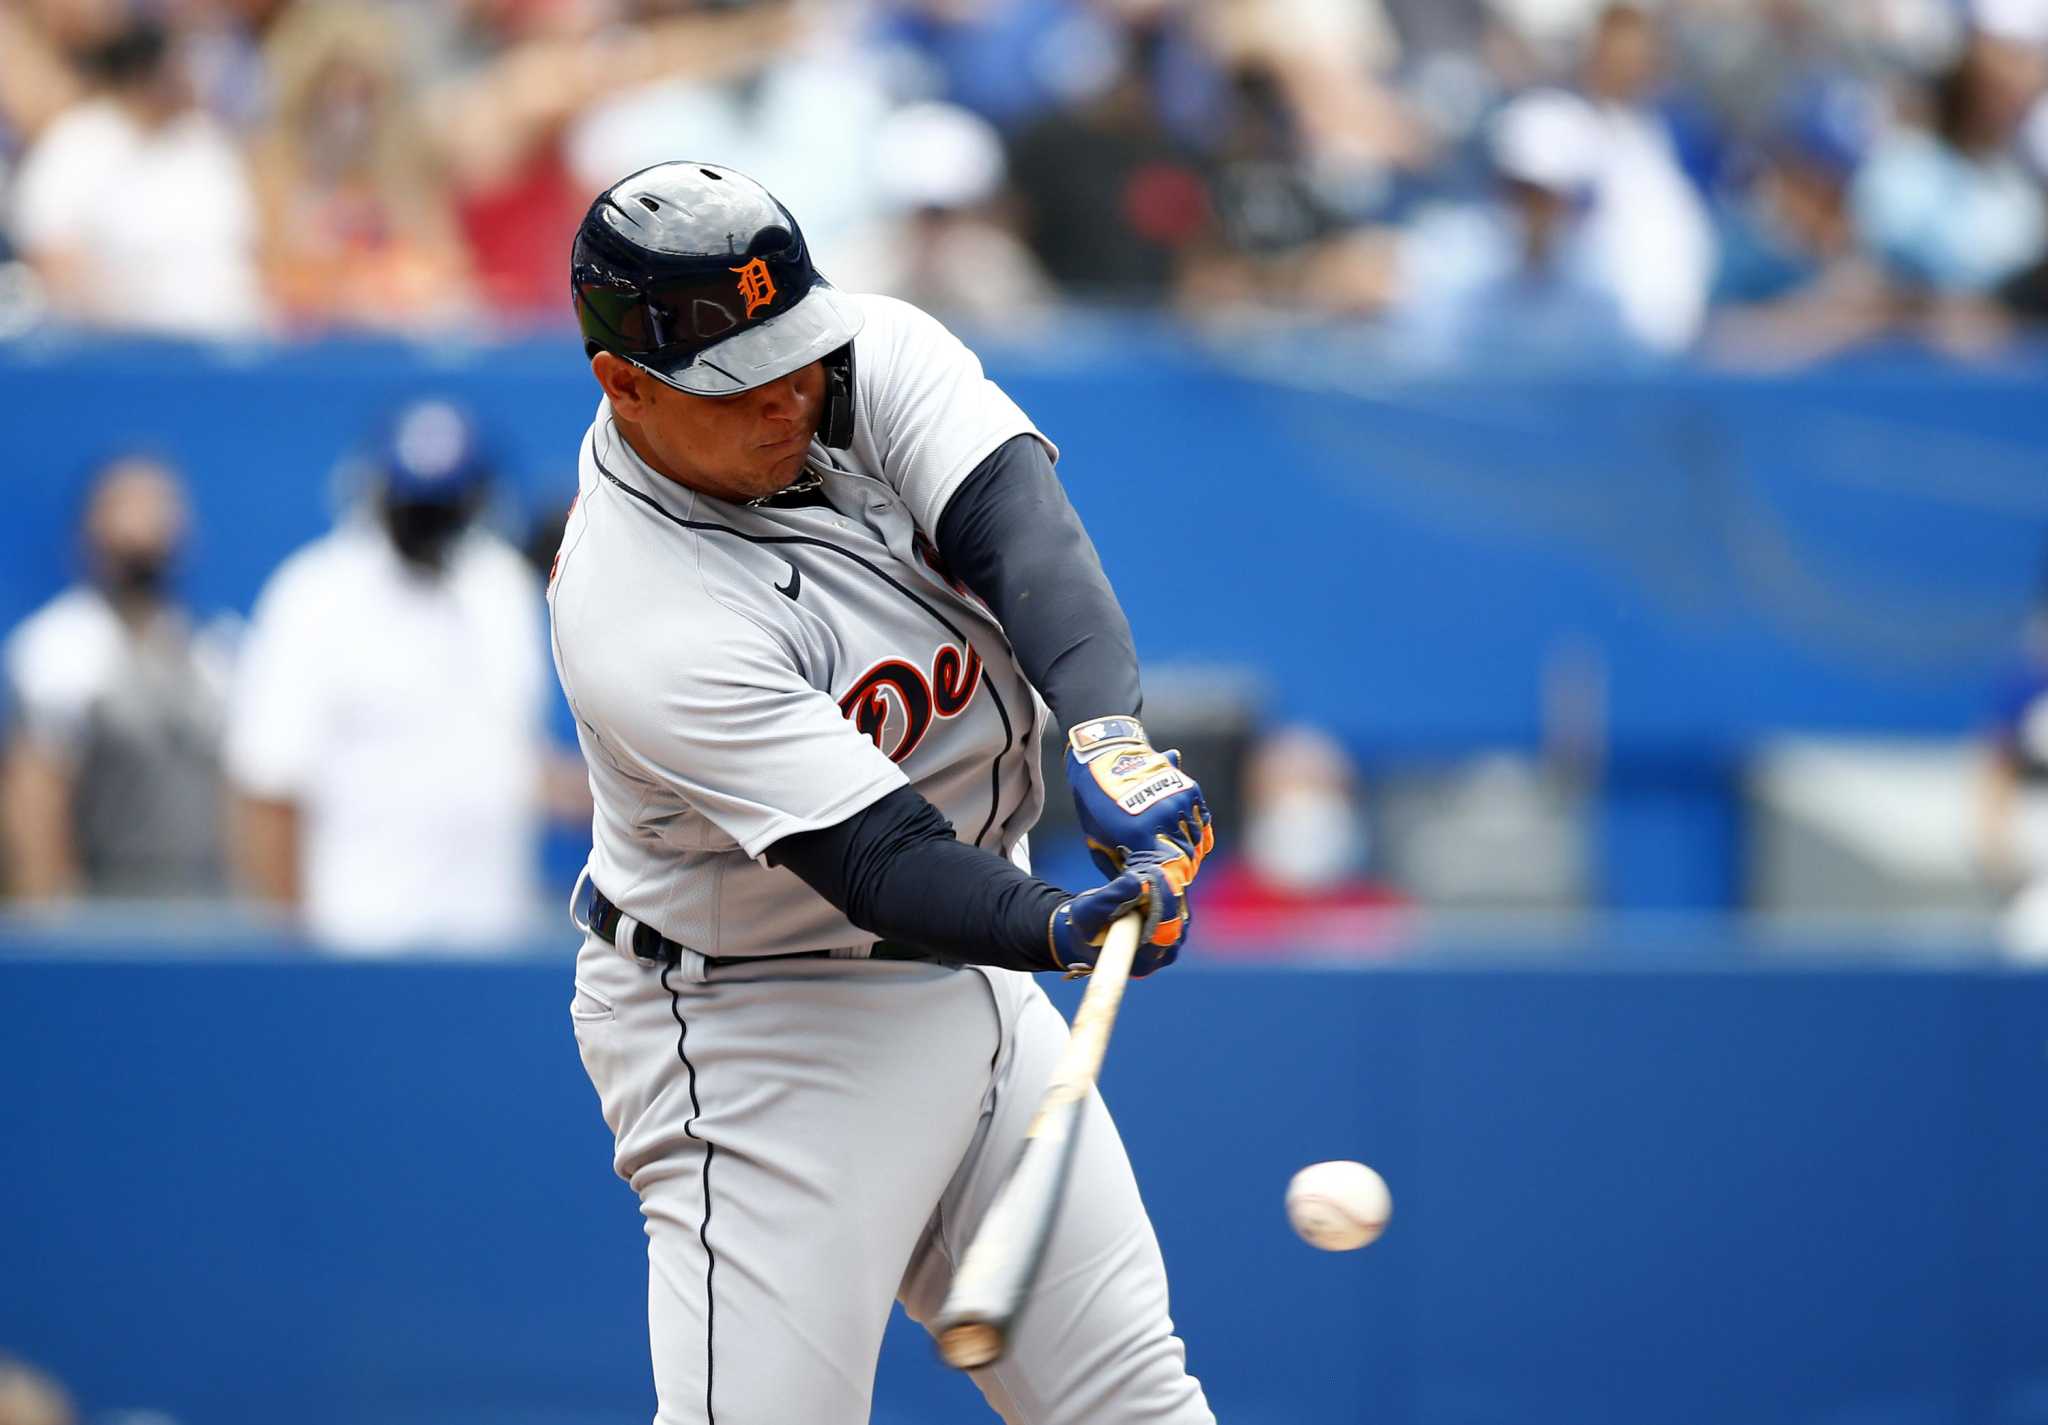 Miguel Cabrera is the 1st Venezuelan-born player to get 3,000 hits